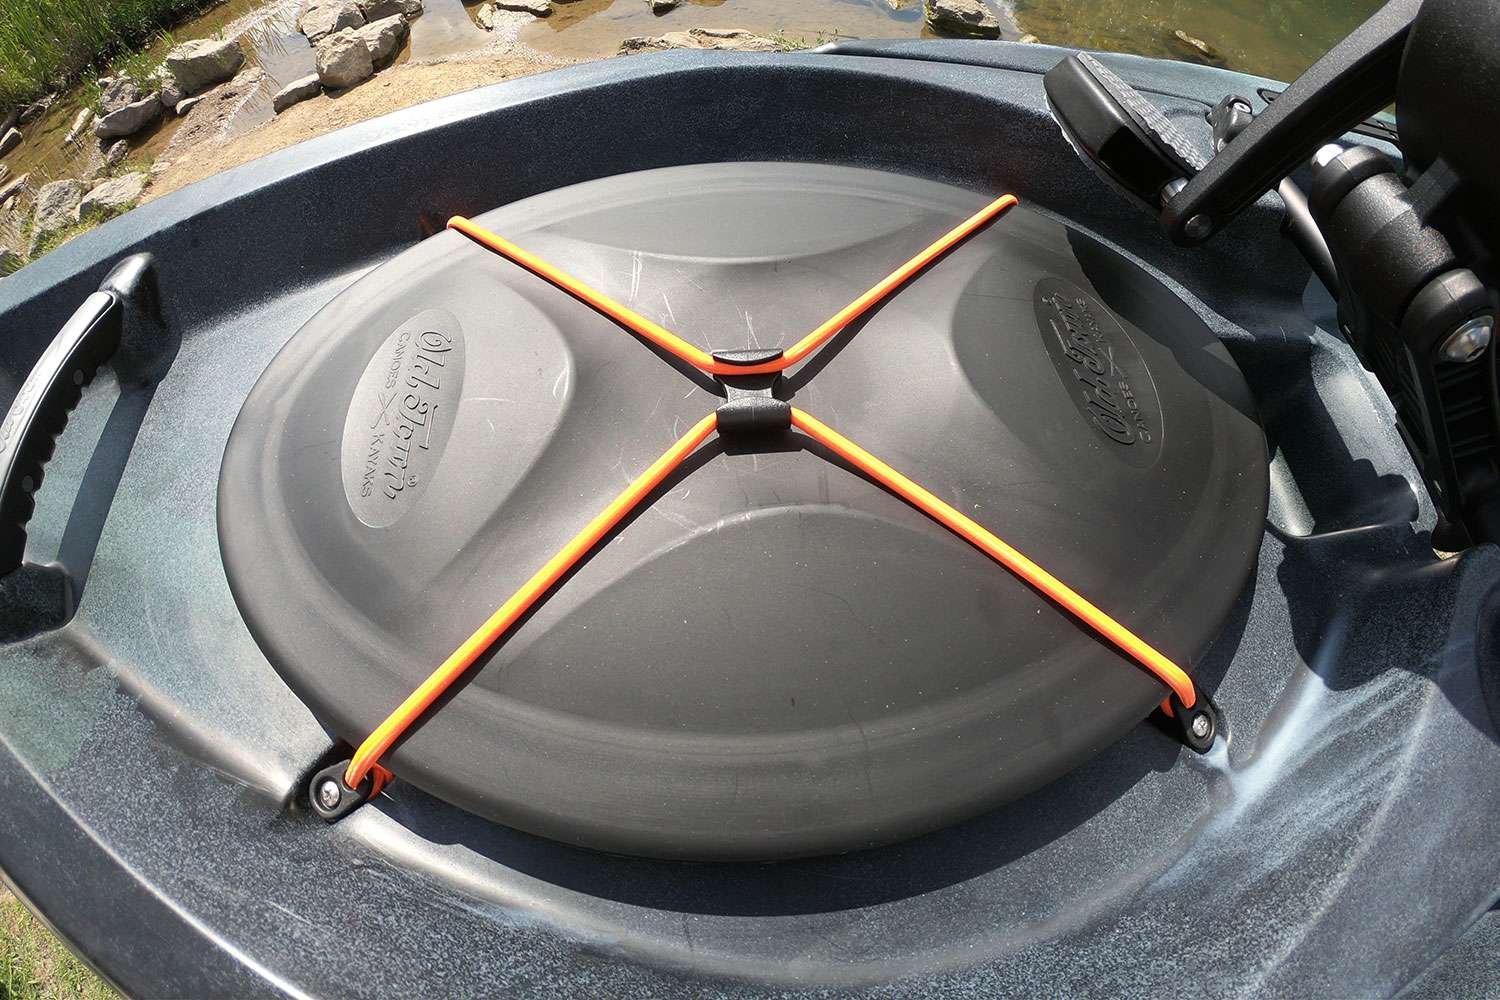 The hatch is held closed with two bungee cords that can be disconnected with one hand. 